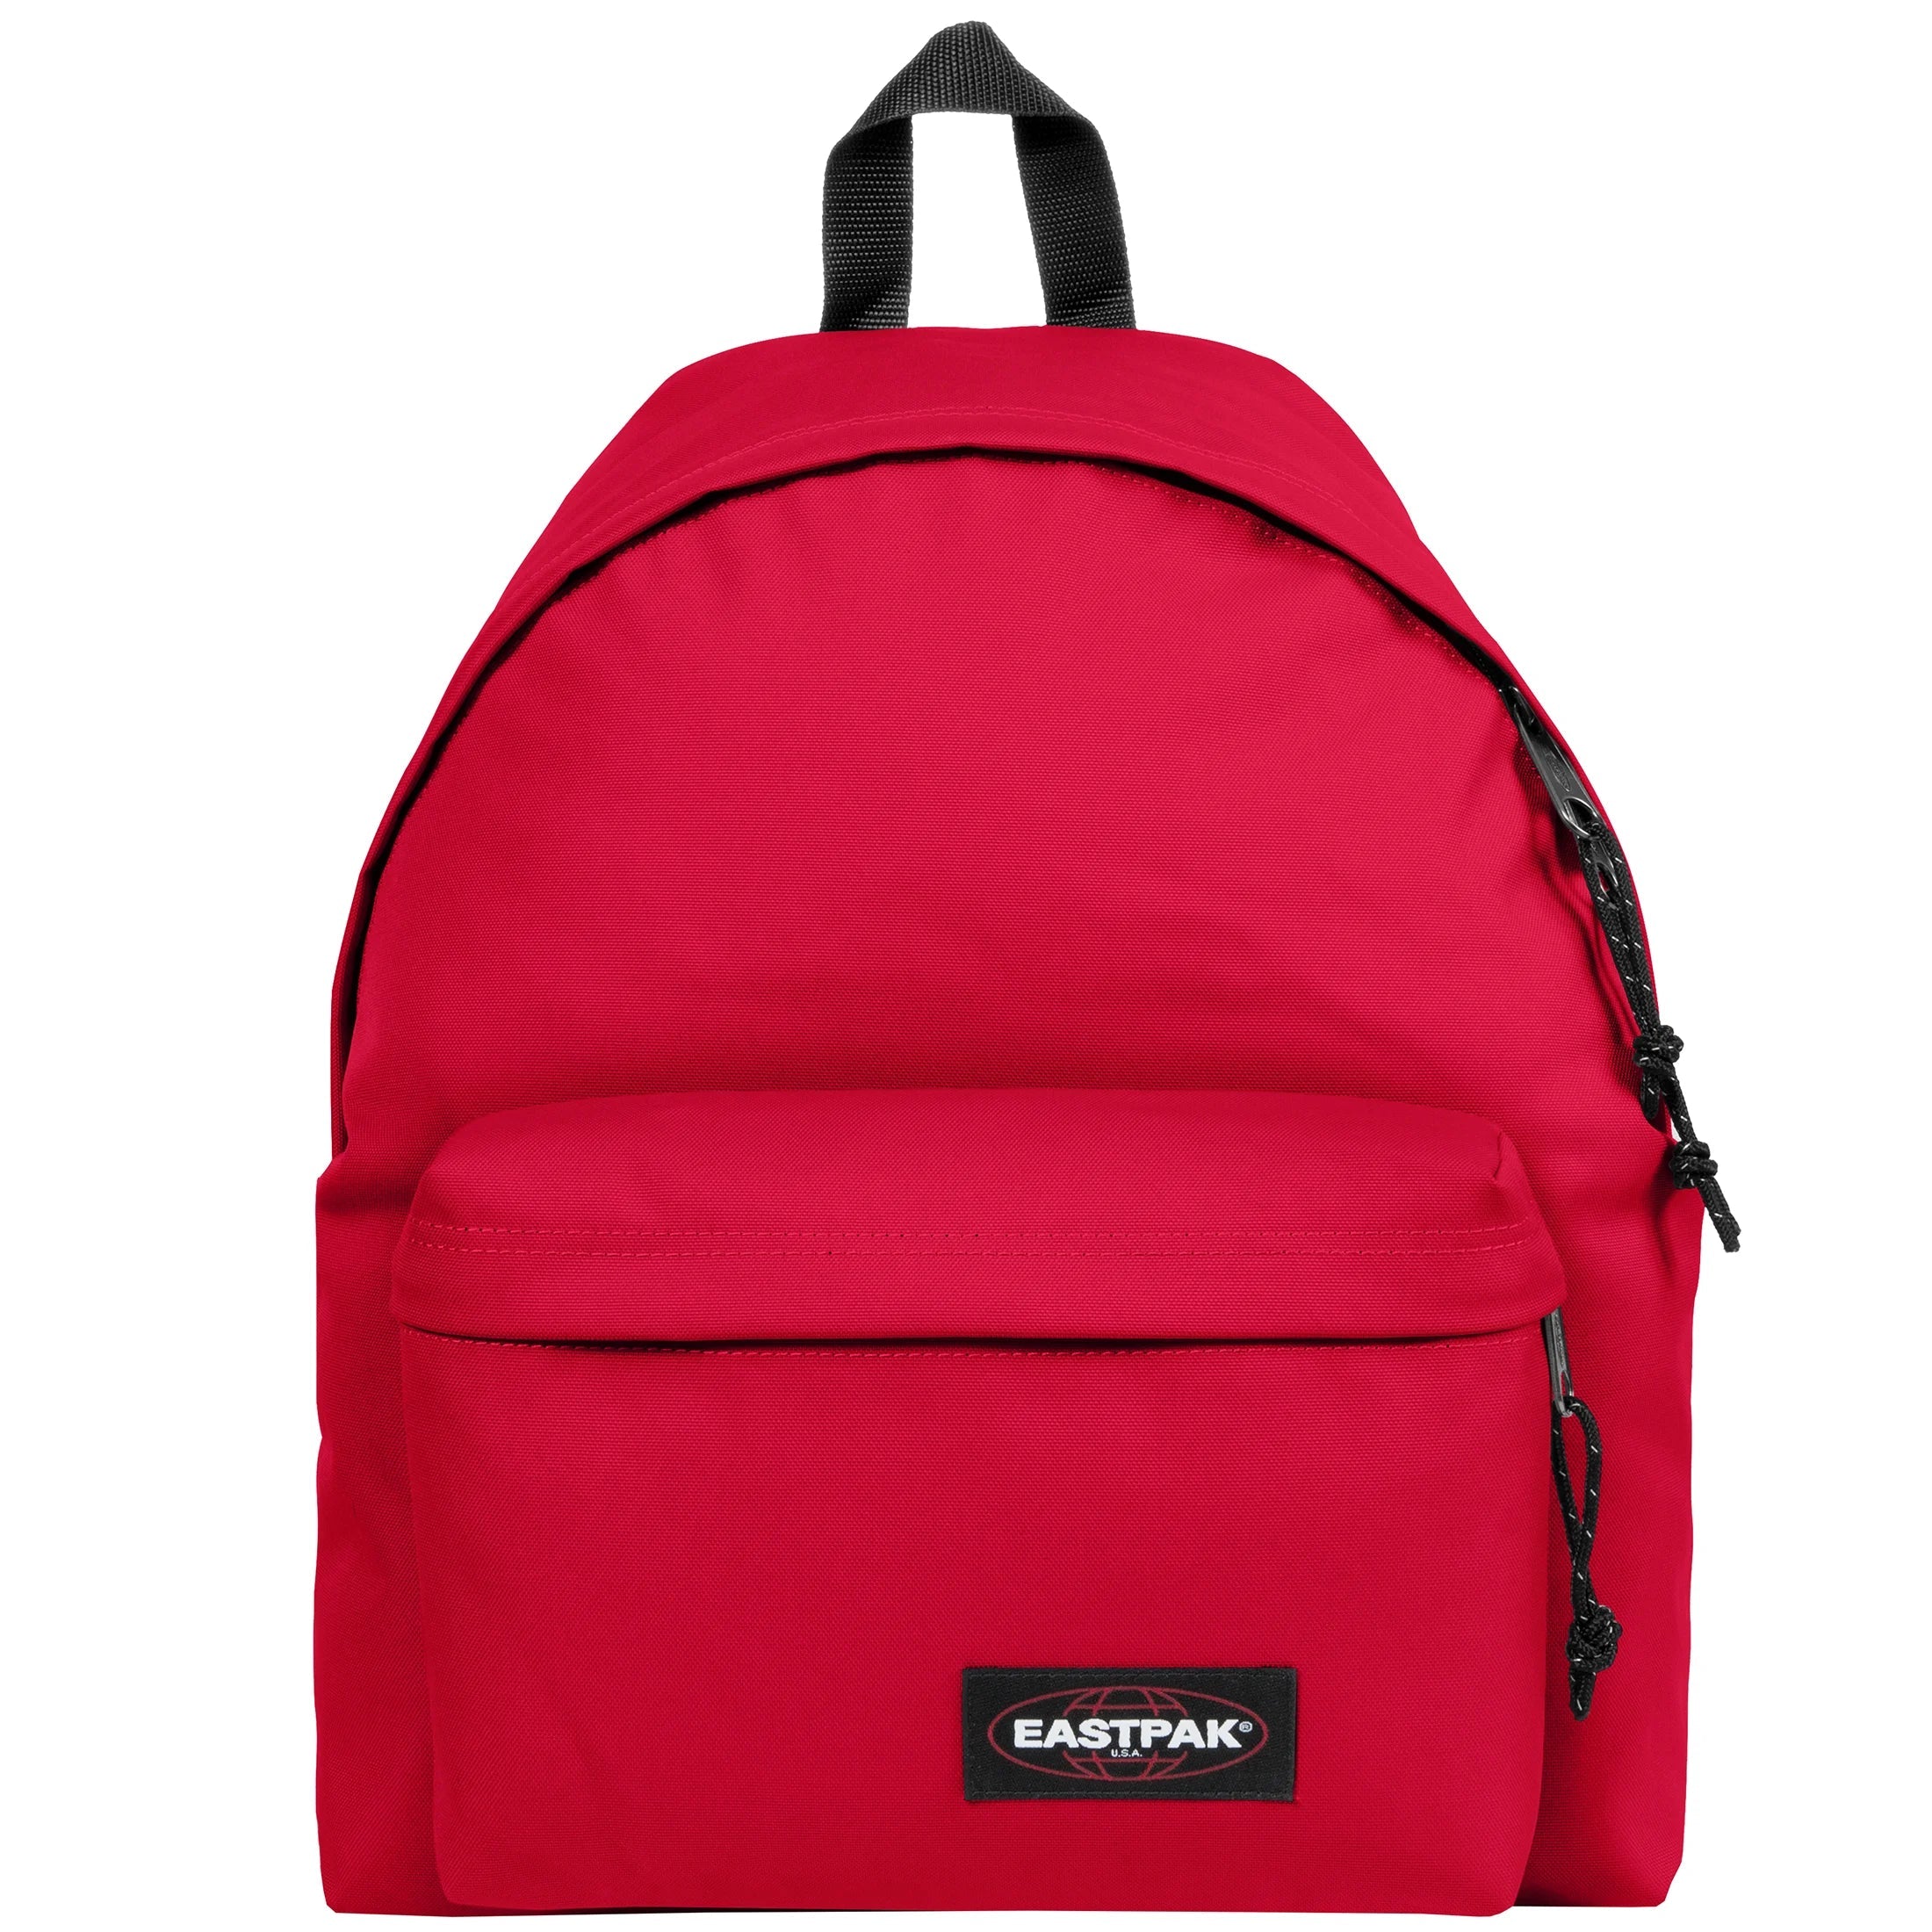 Eastpak Authentic Padded Pak'r leisure backpack 41 cm - Sailor Red